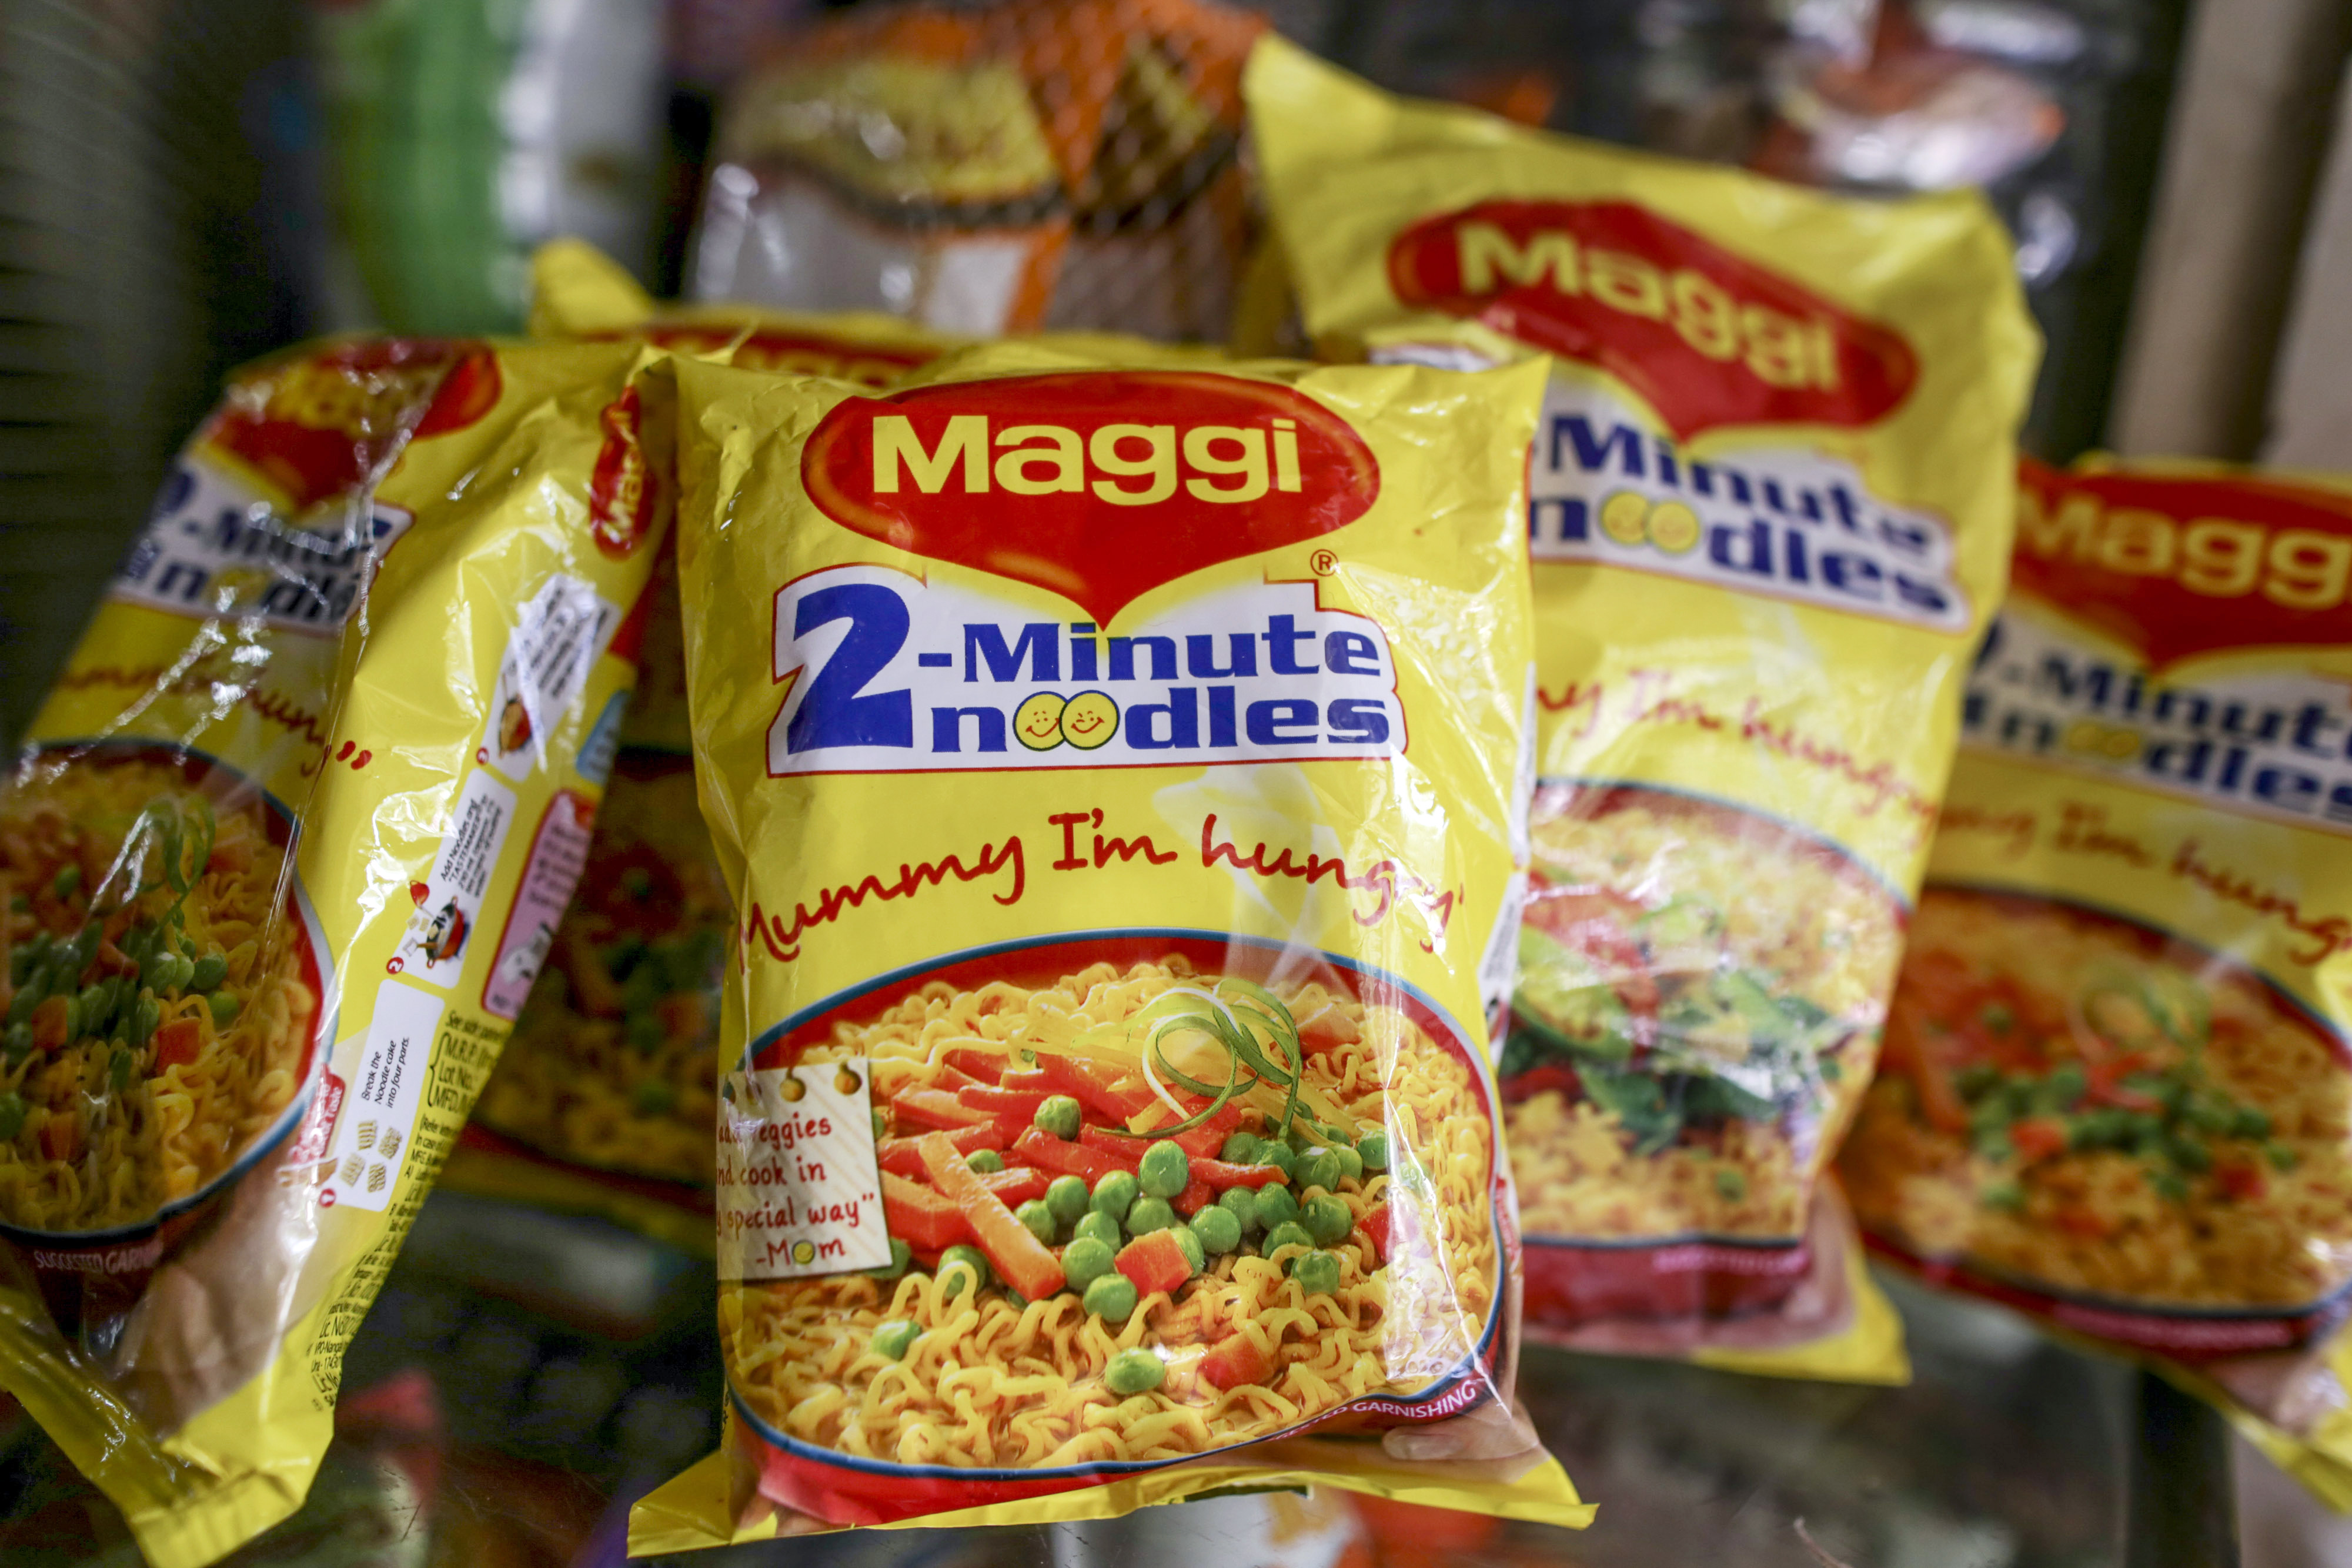 Packets of Maggi 2-Minute Noodles, manufactured by Nestle India Ltd., center, are arranged for a photograph at a general store in Mumbai, India, on Tuesday, June 2, 2015. (Dhiraj Singh—Bloomberg/Getty Images)